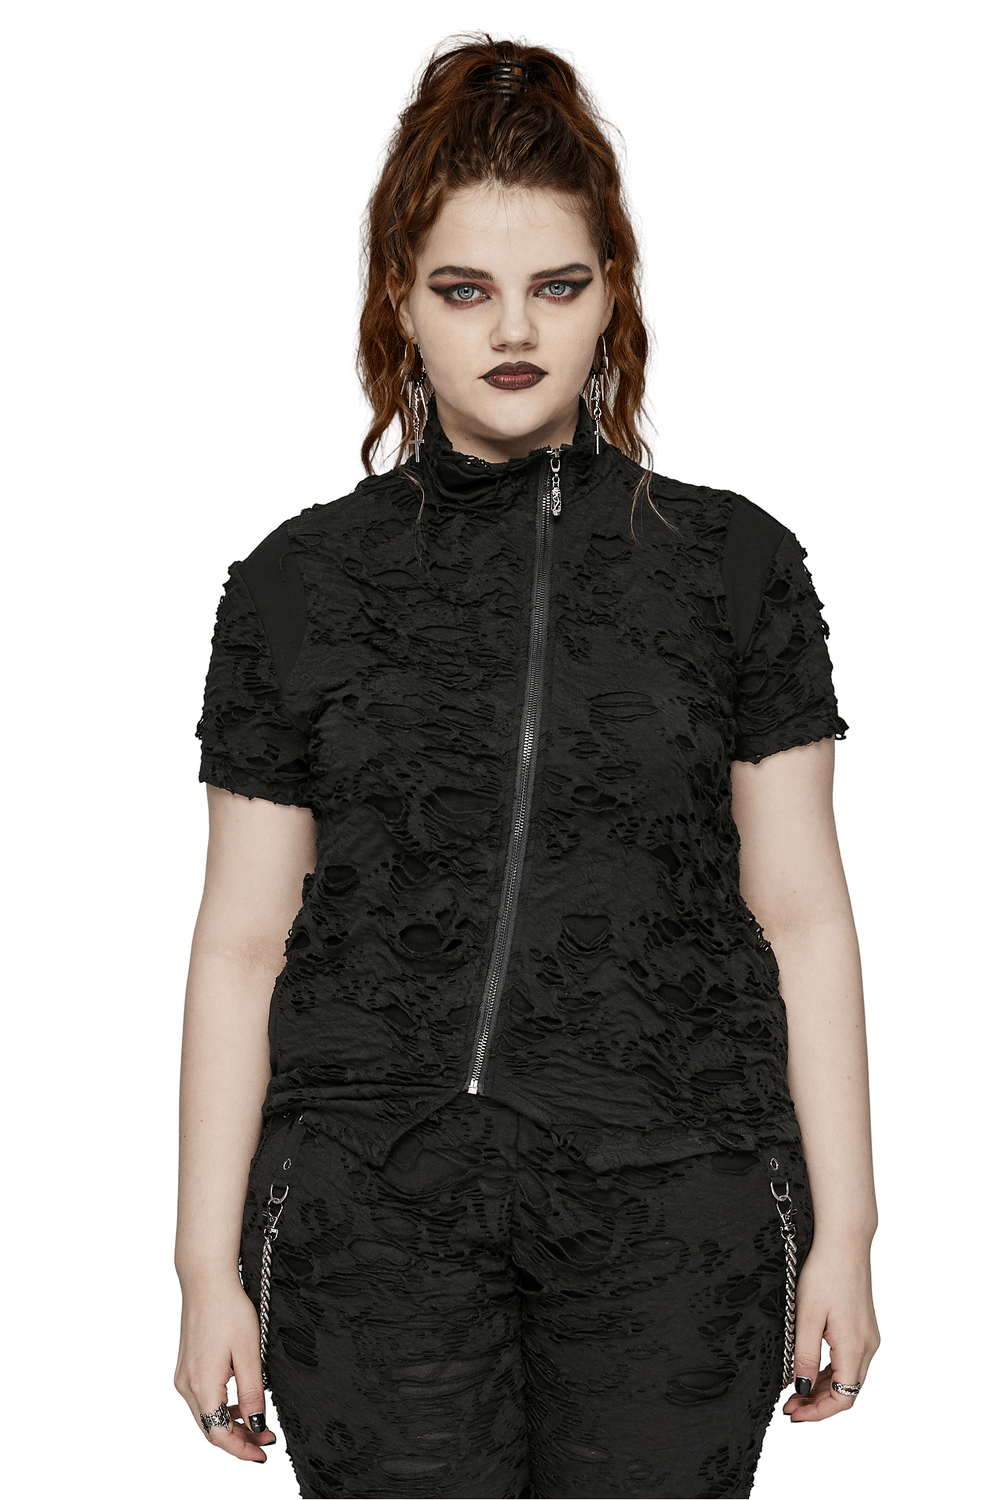 Tattered Punk Top with Front Zipper and Short Sleeves